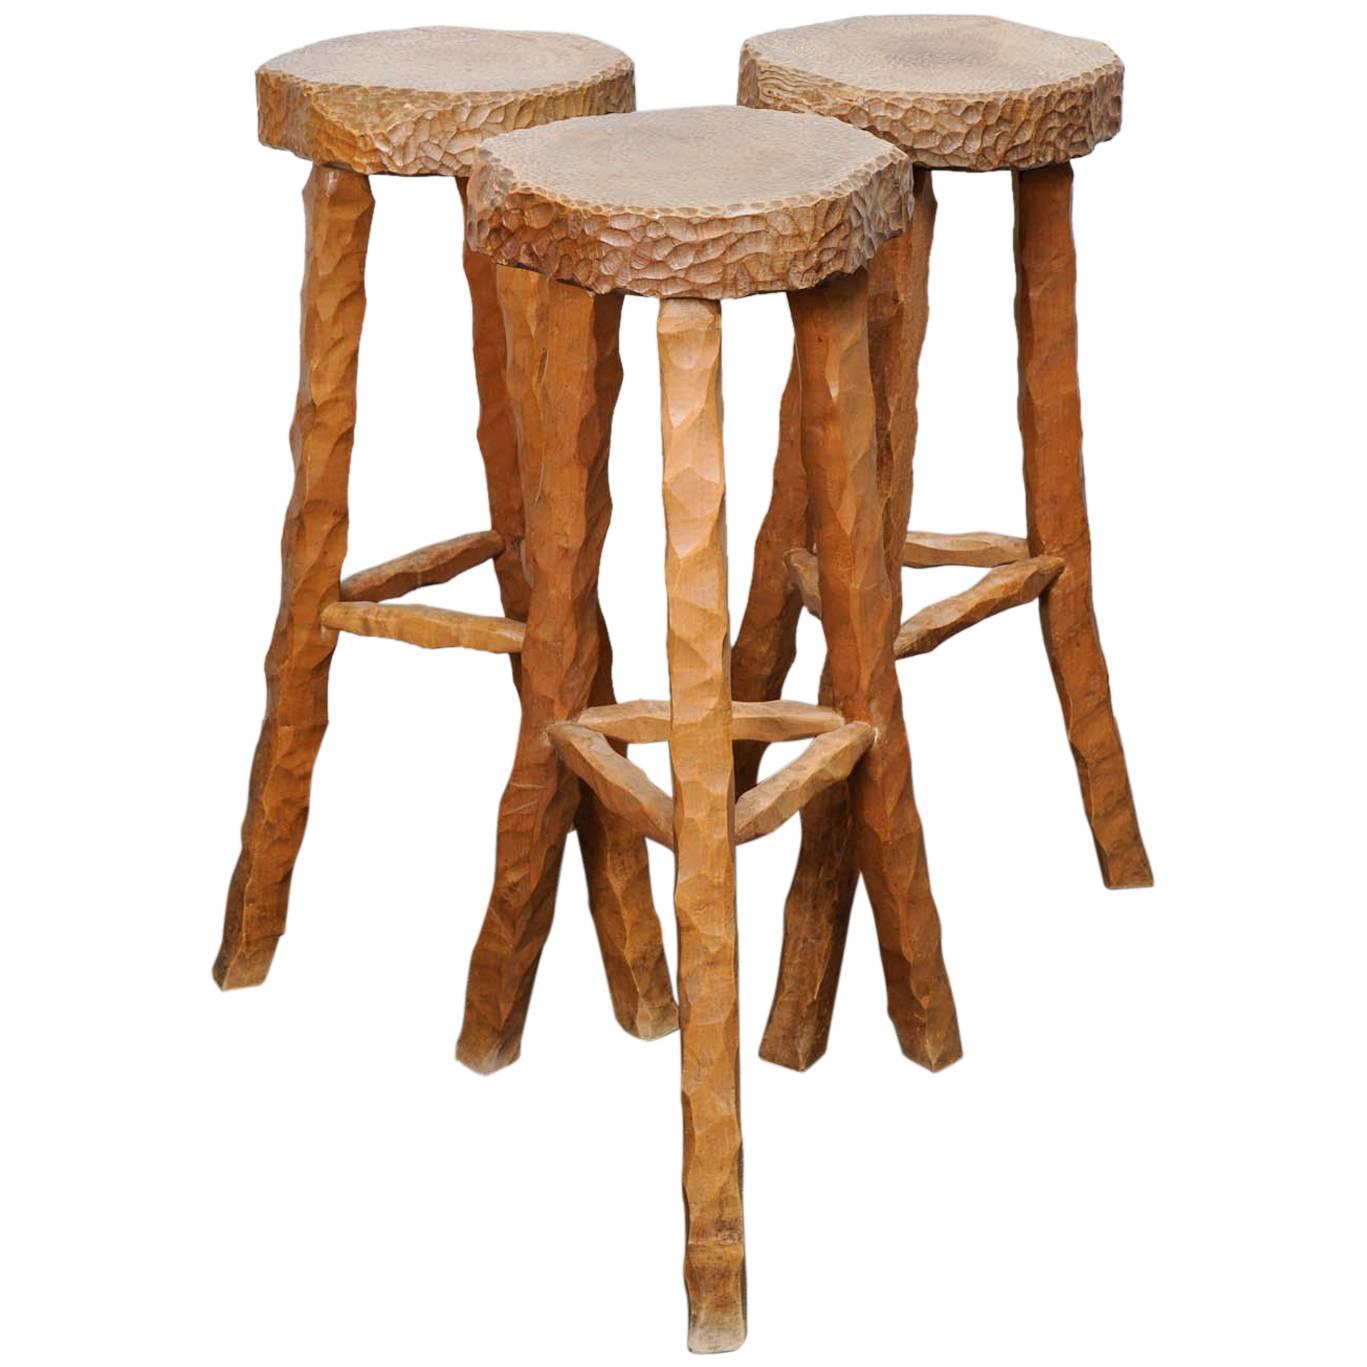 Set of Three Stools Bar in Style of Atelier Marolles